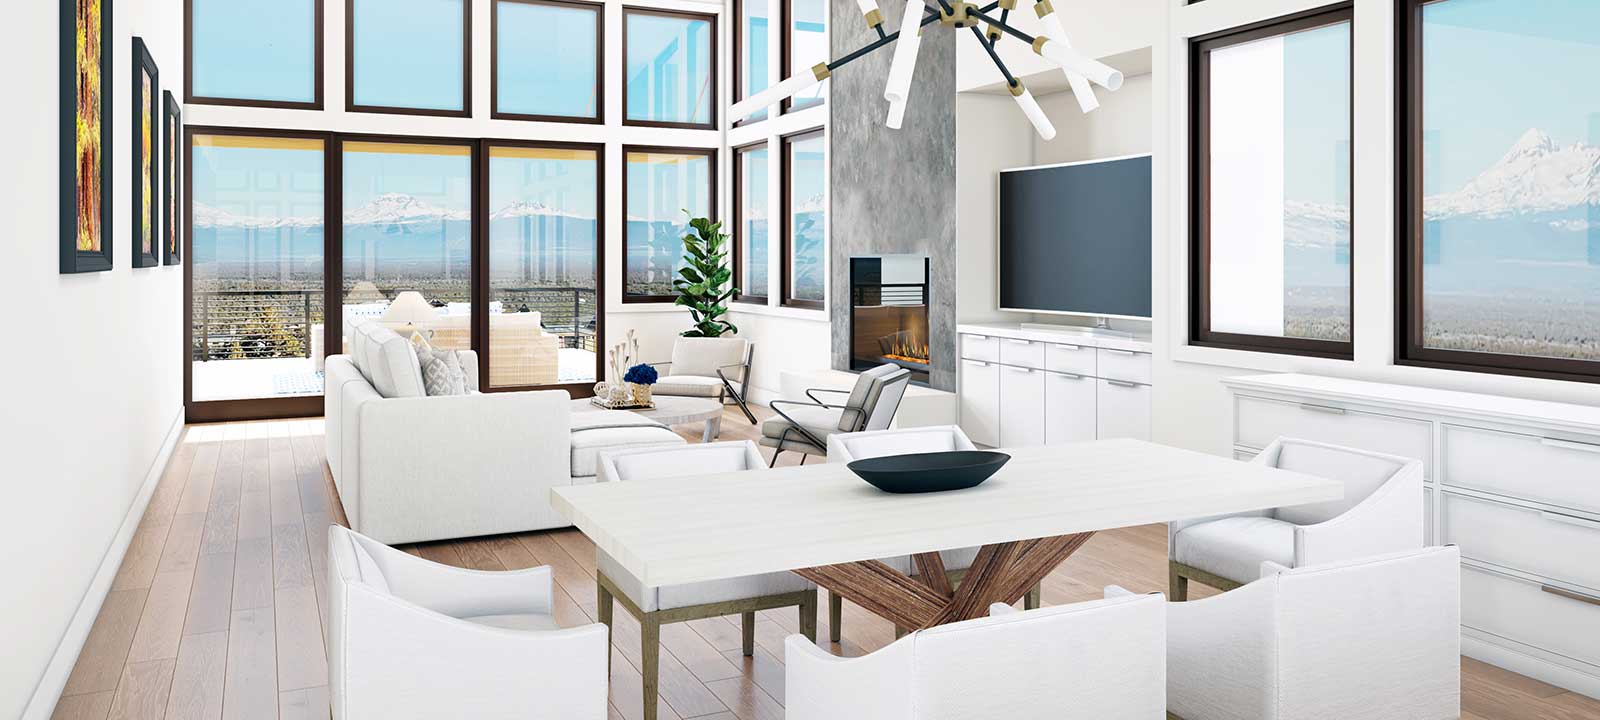 Aspen Living Room - Shown with standard options